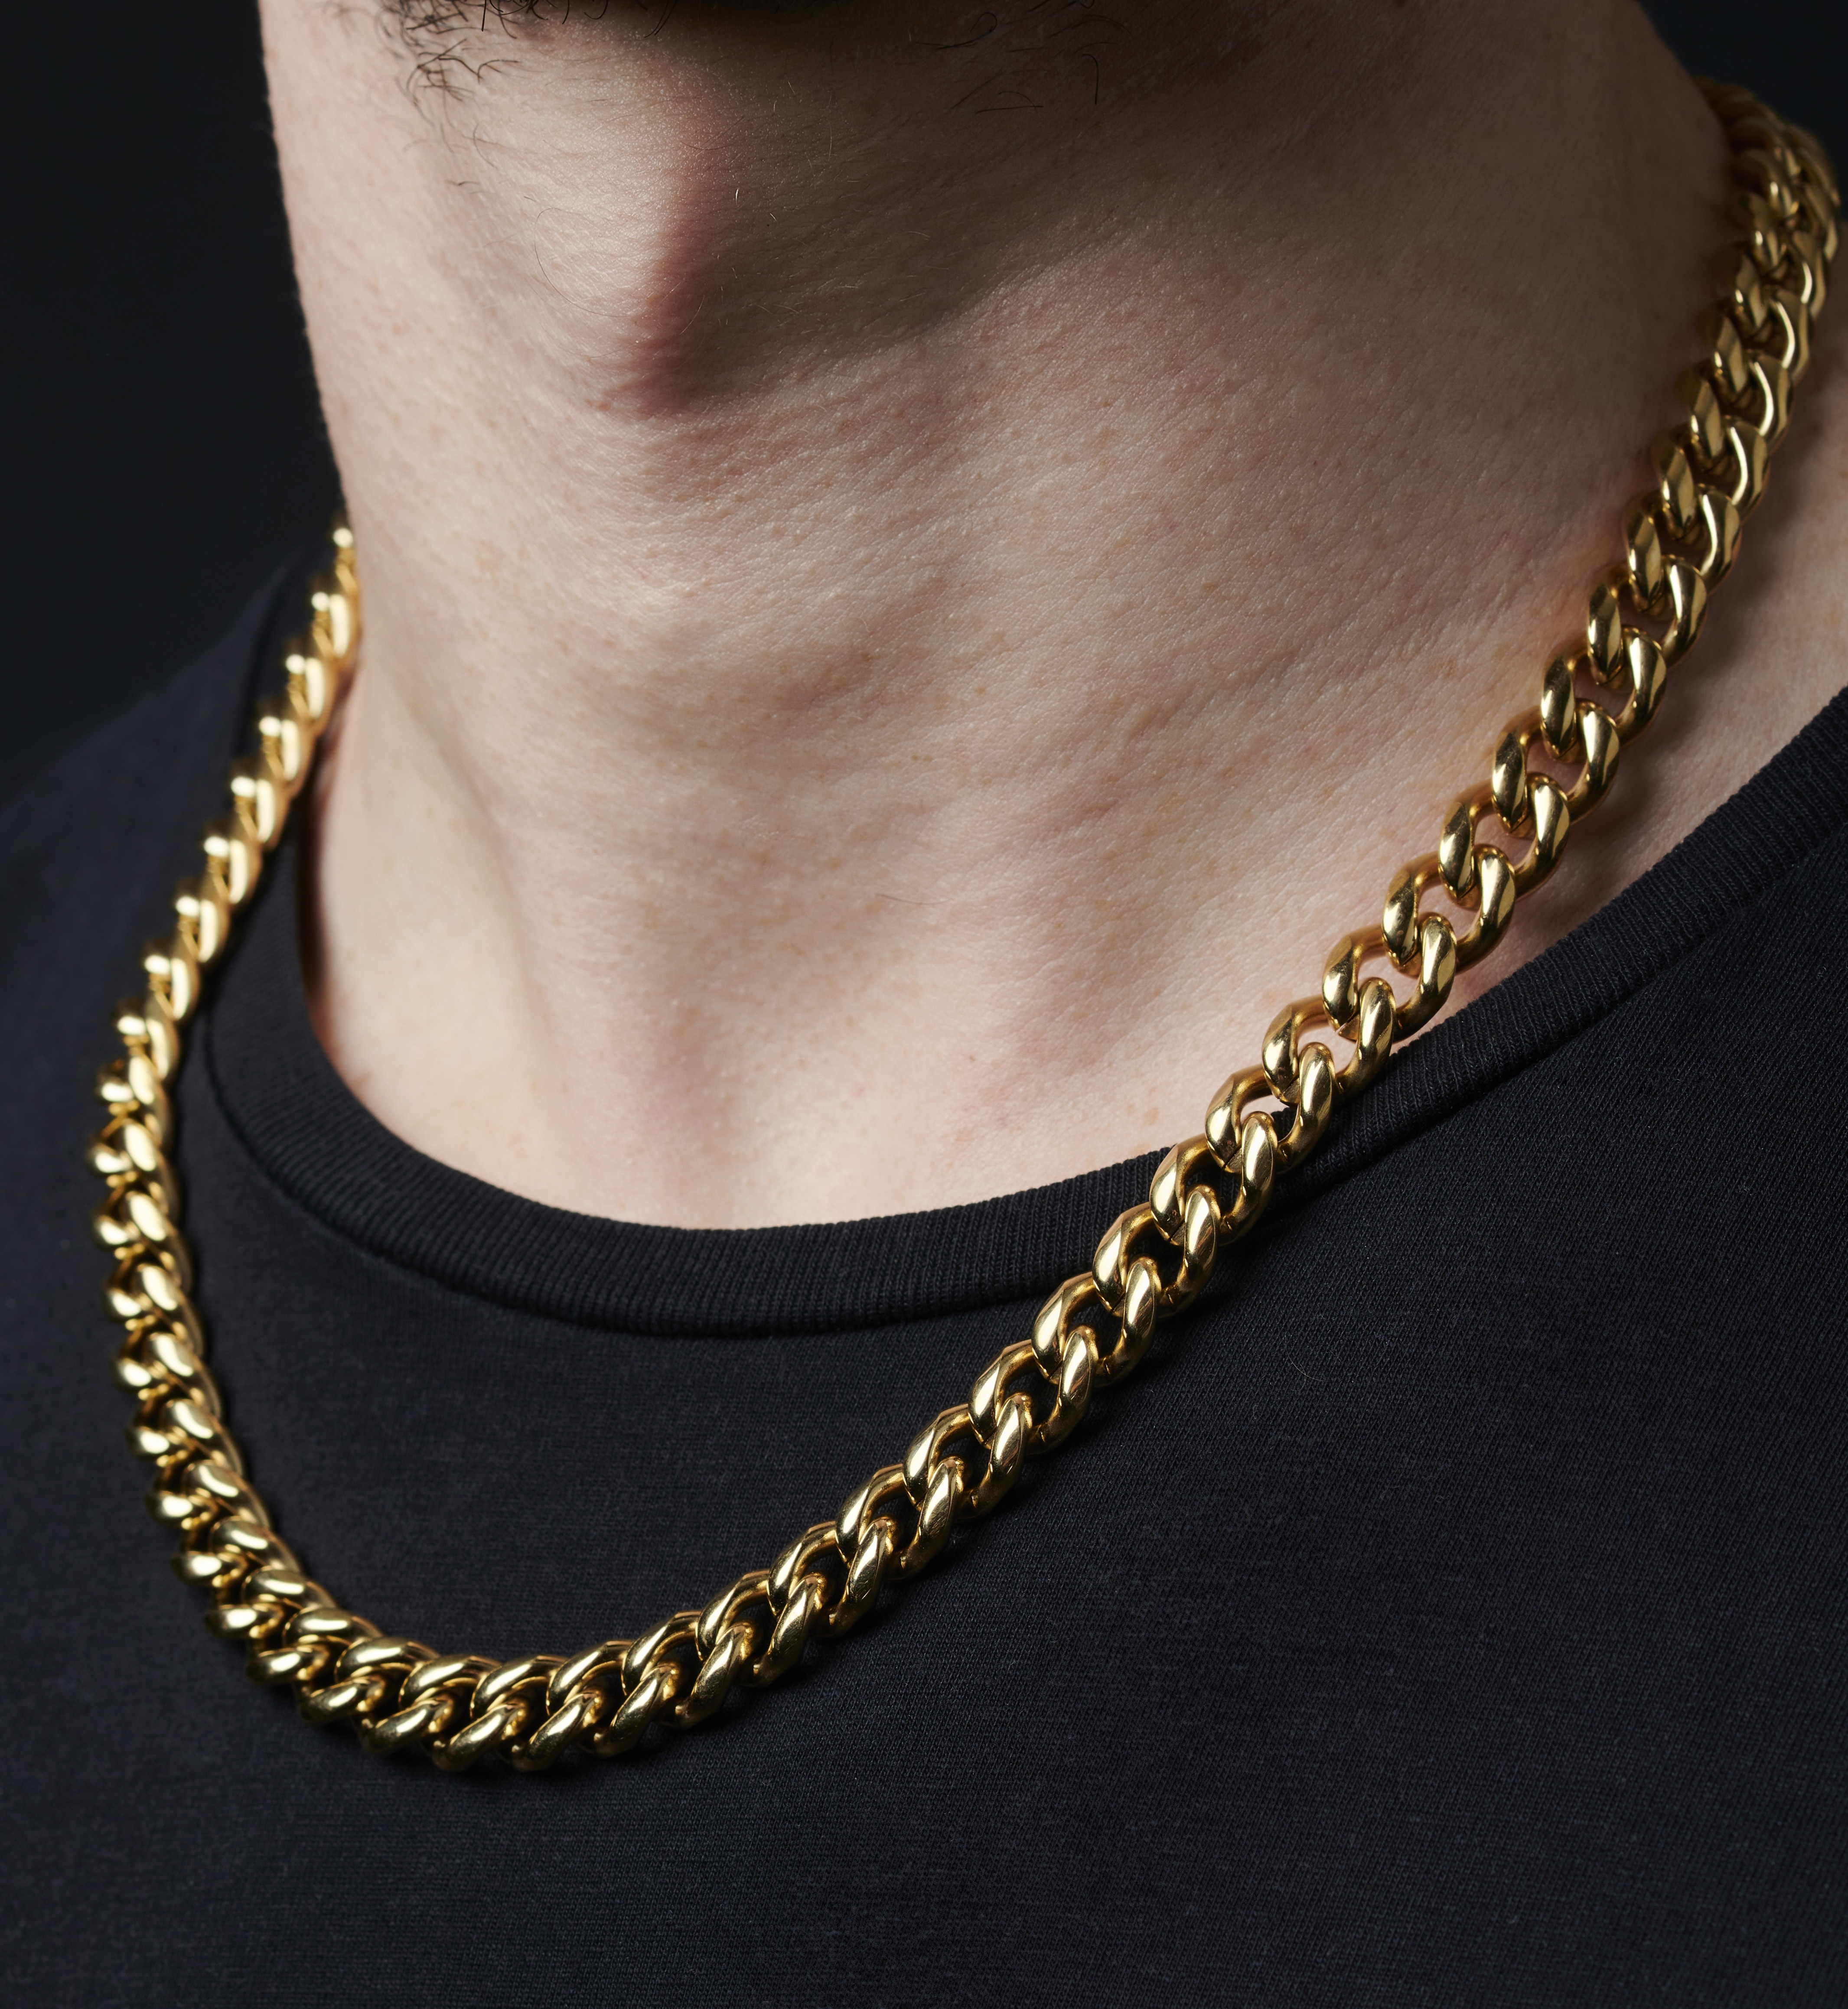 All Pockets Full Pendant with Cuban link Chain